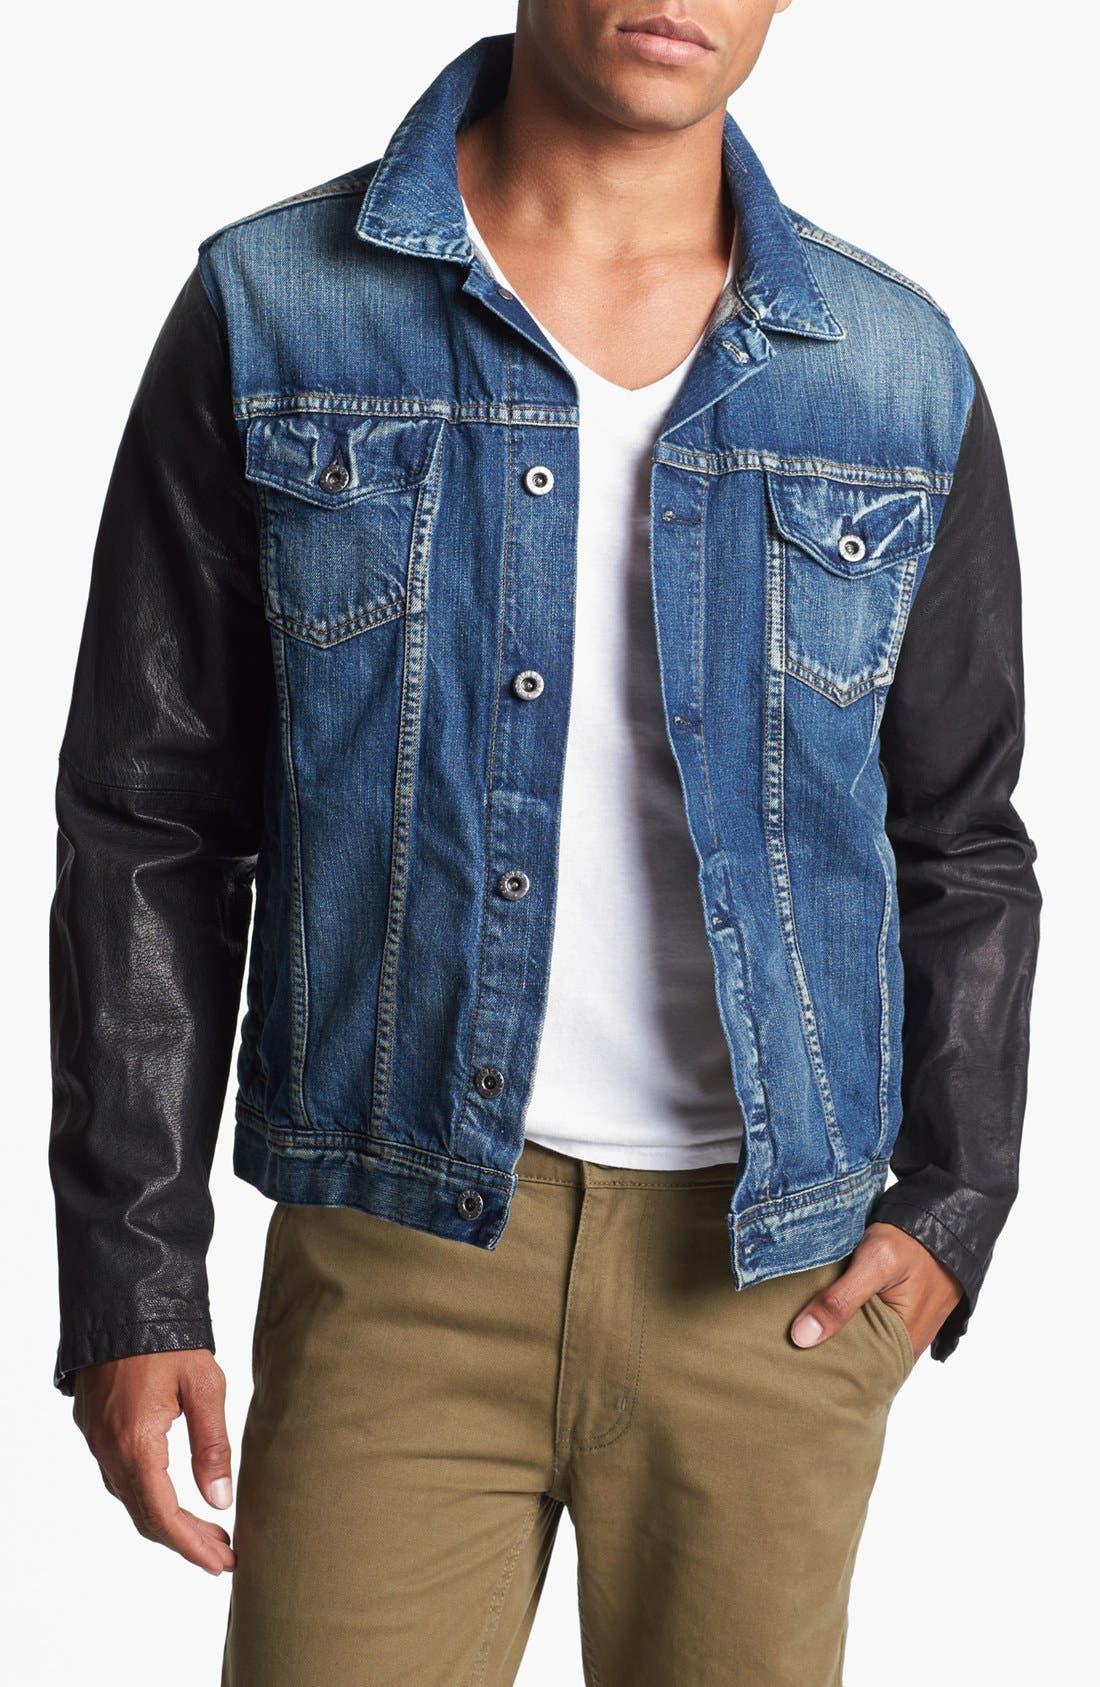 jean jacket with leather sleeves